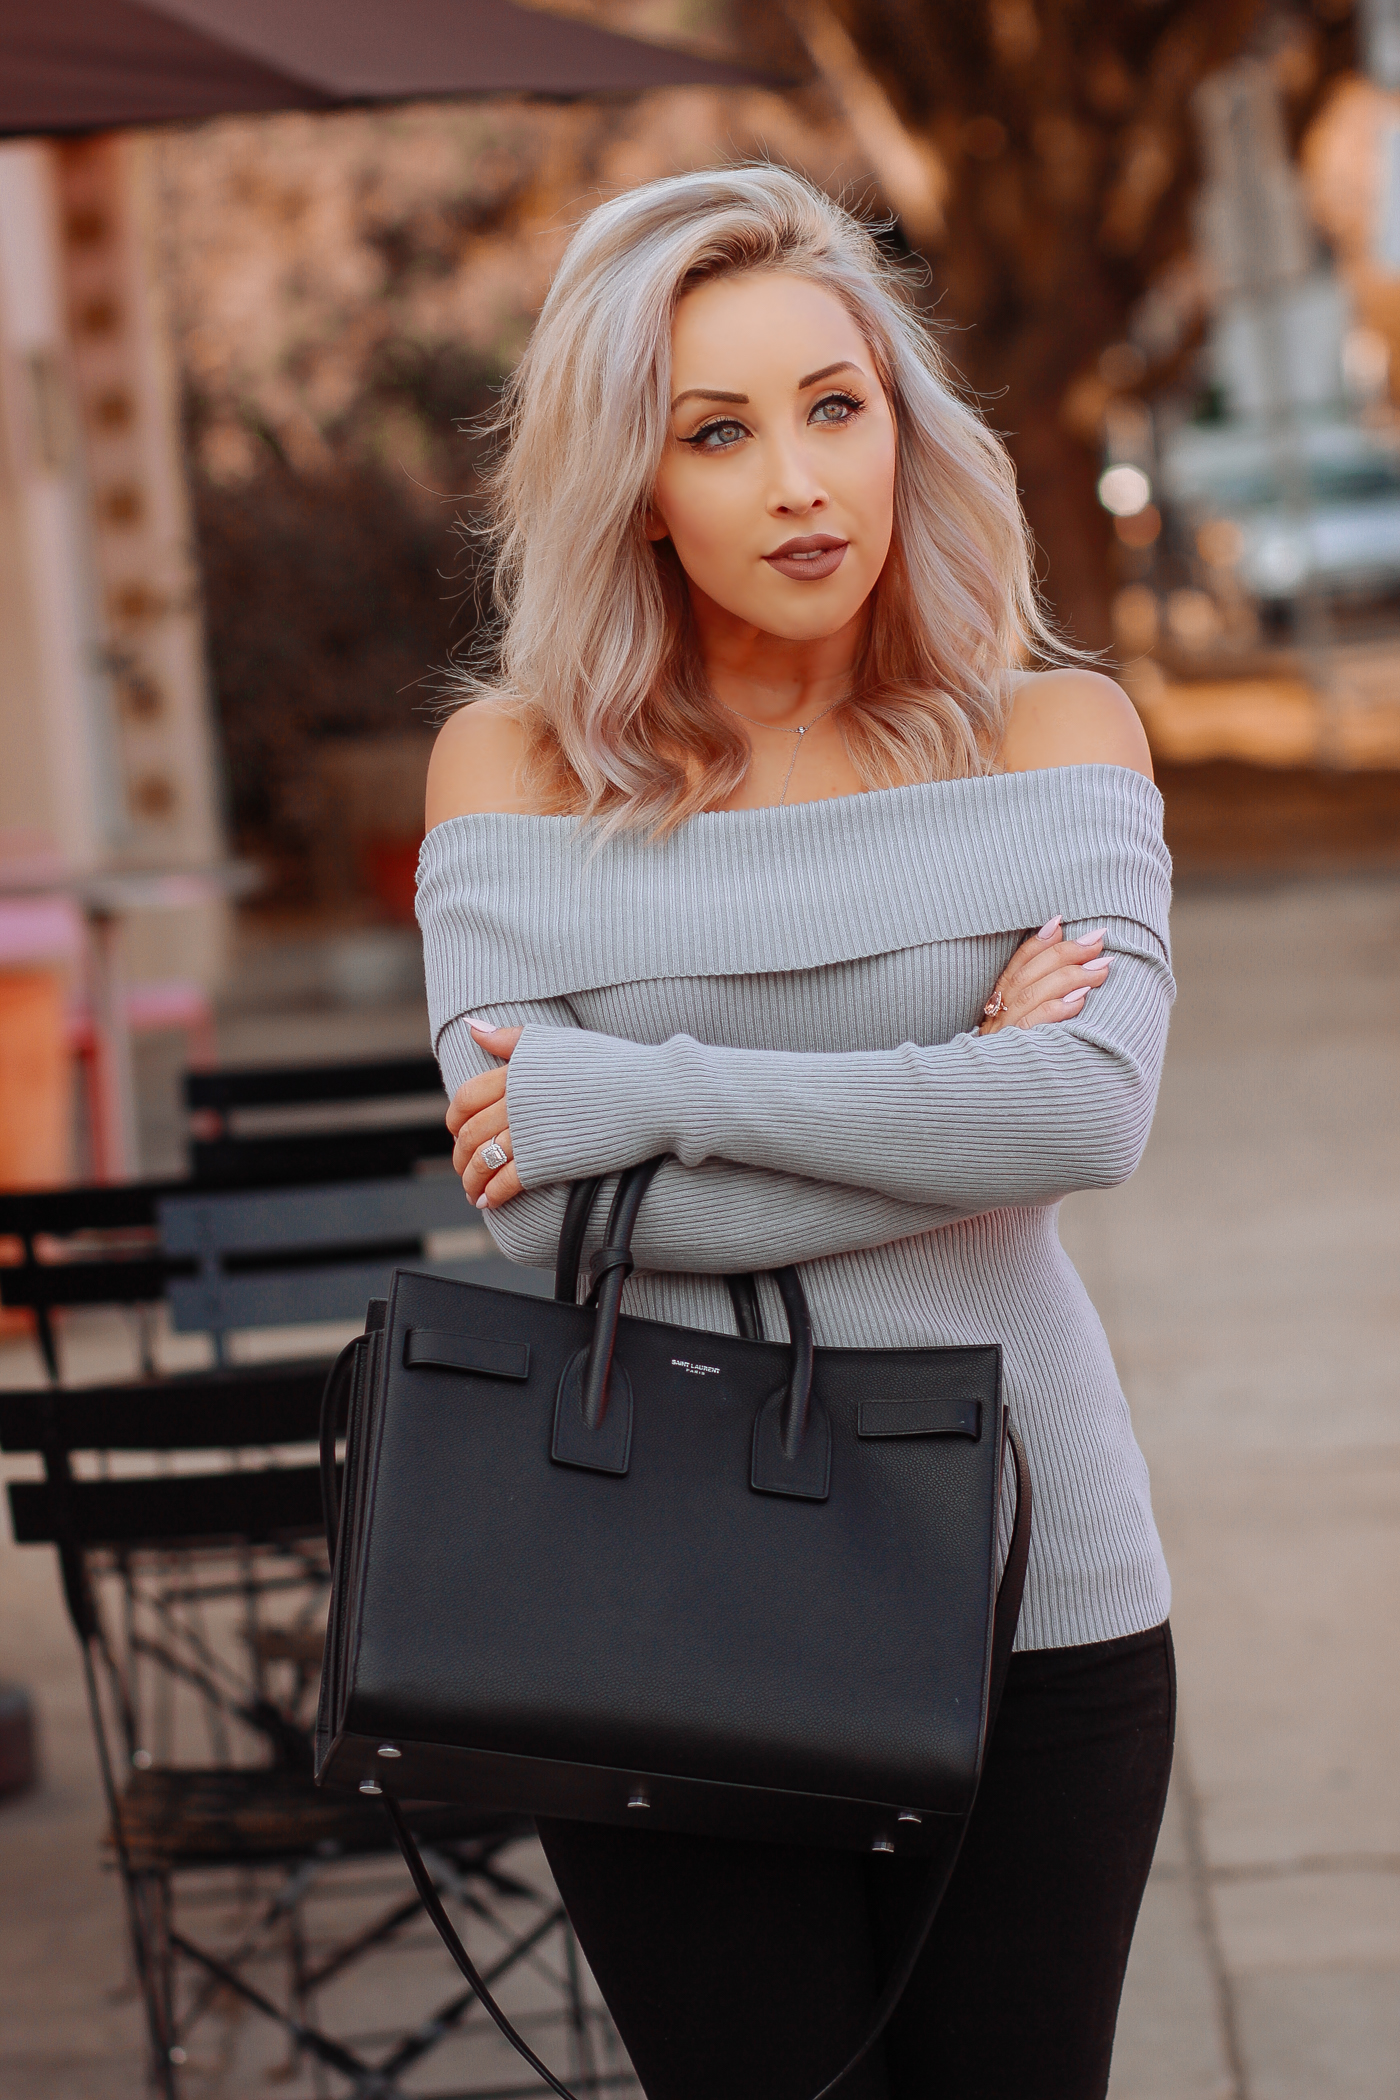 Blondie in the City | Off The Shoulder Sweater | Saint Laurent Bag